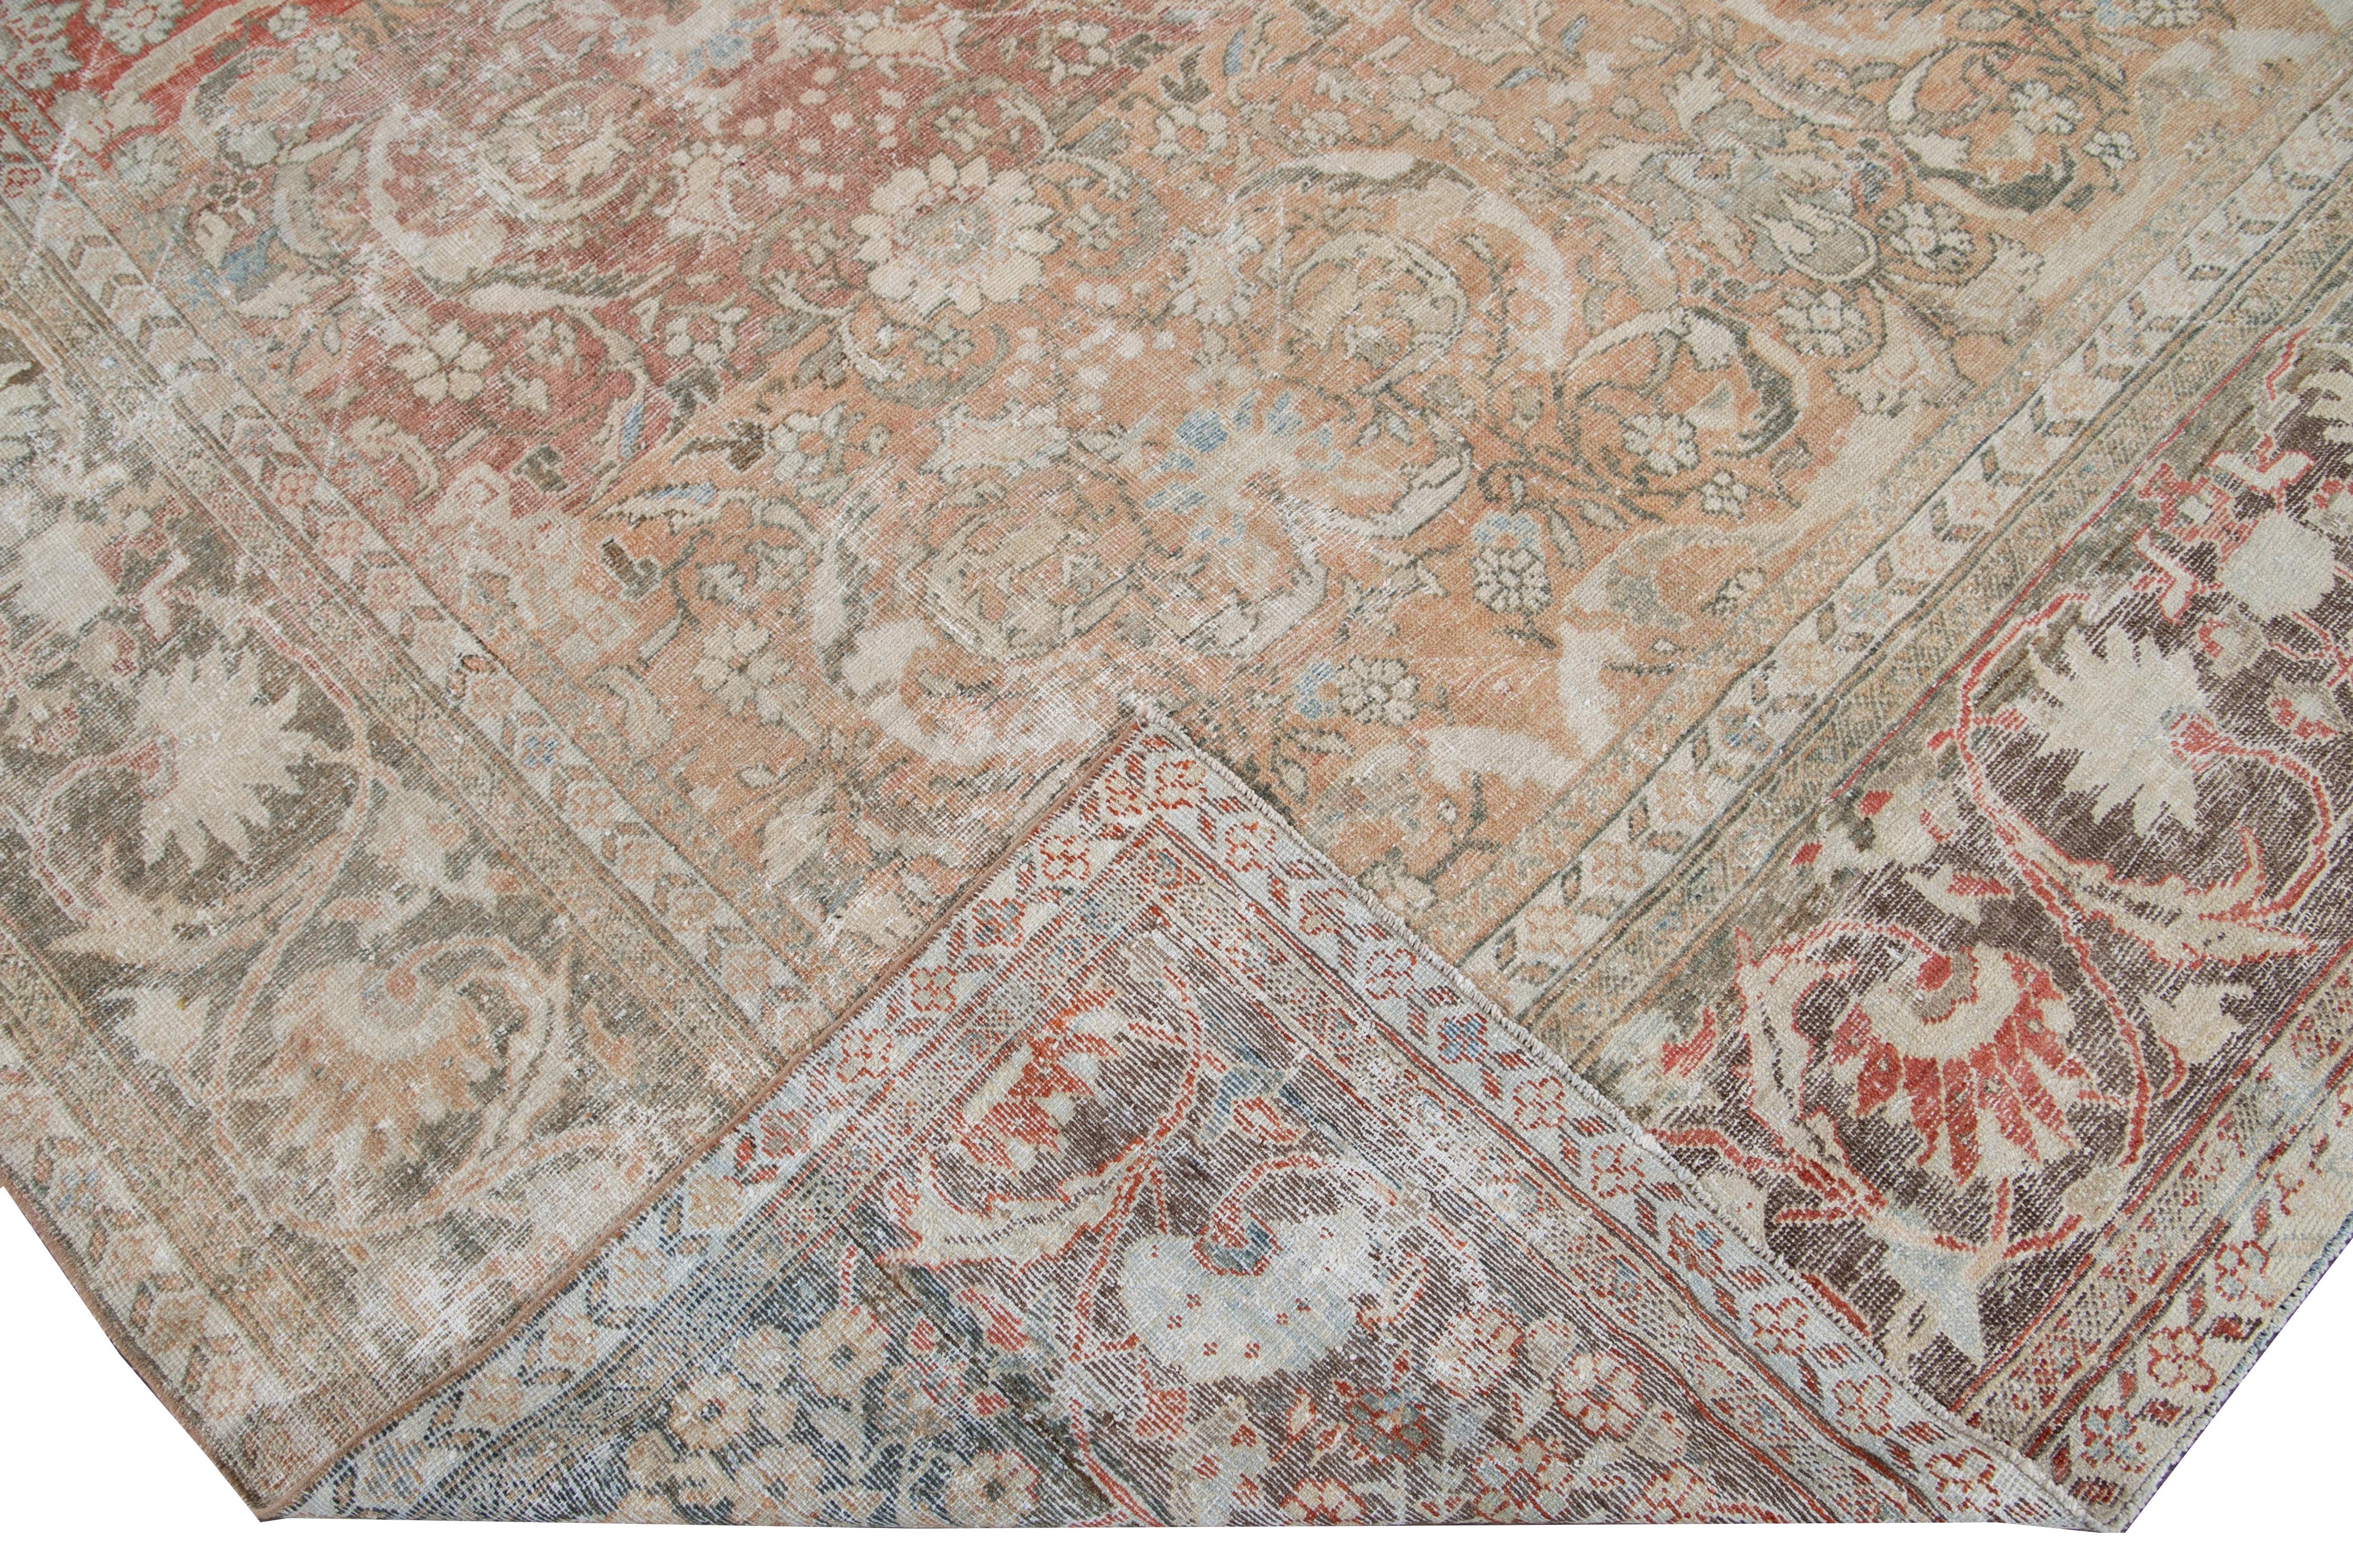 Beautiful antique Mahal hand knotted wool rug with a red field. This rug has a brown frame and multi-color accents in a gorgeous all-over distressed shabby chic floral design.

This rug measures: 10'1